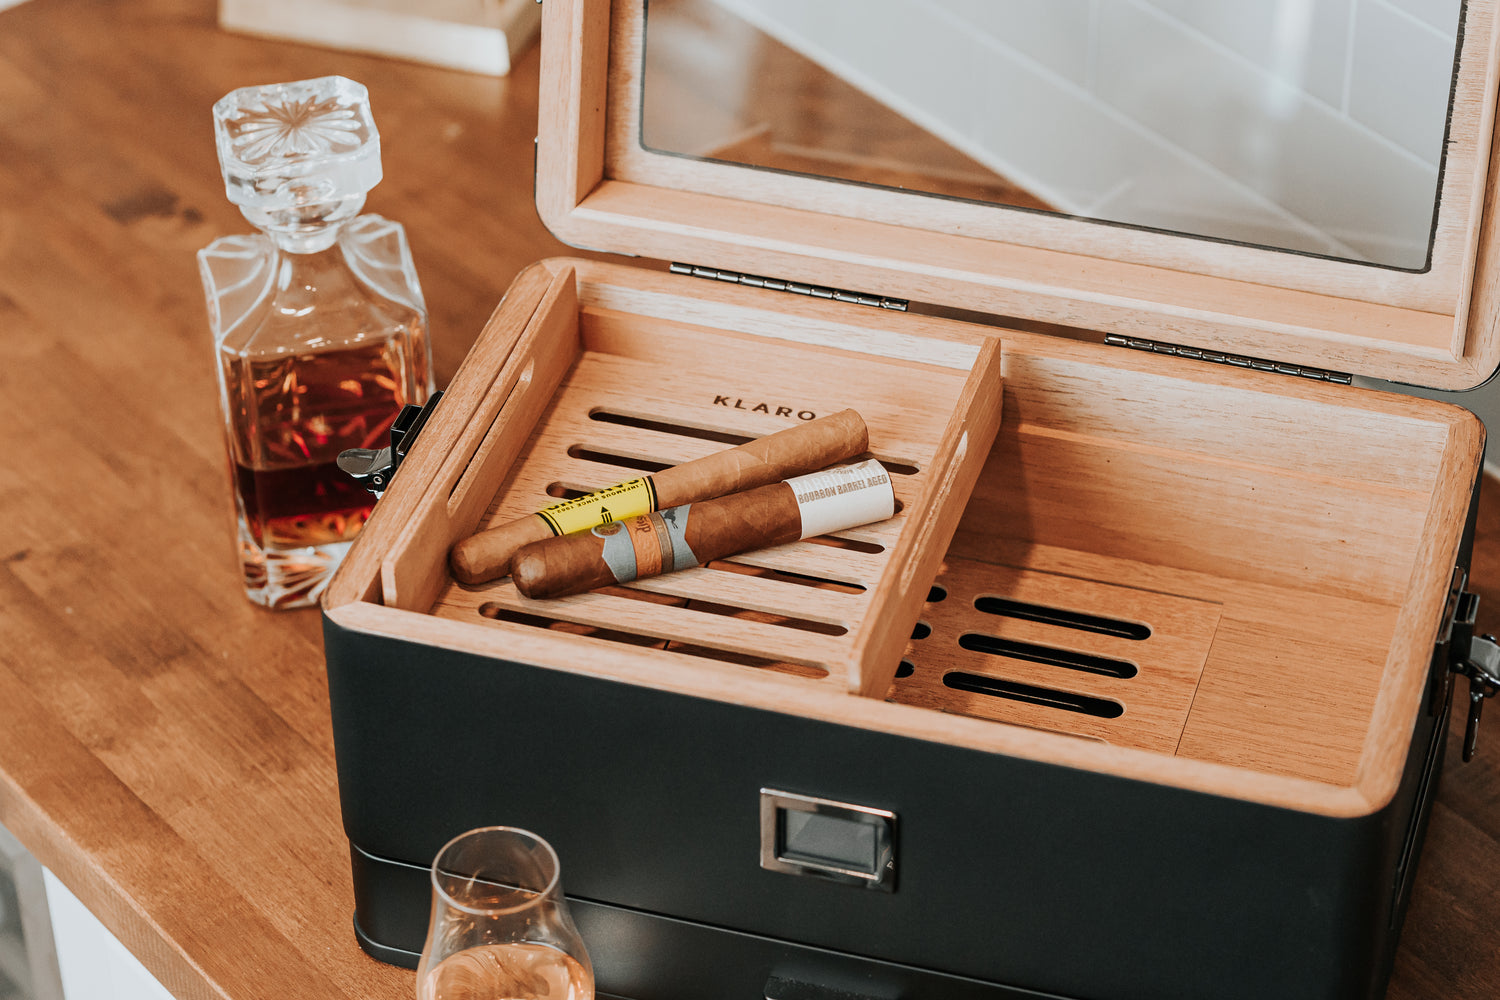 What Will $100-$300 Get You In a Humidor?